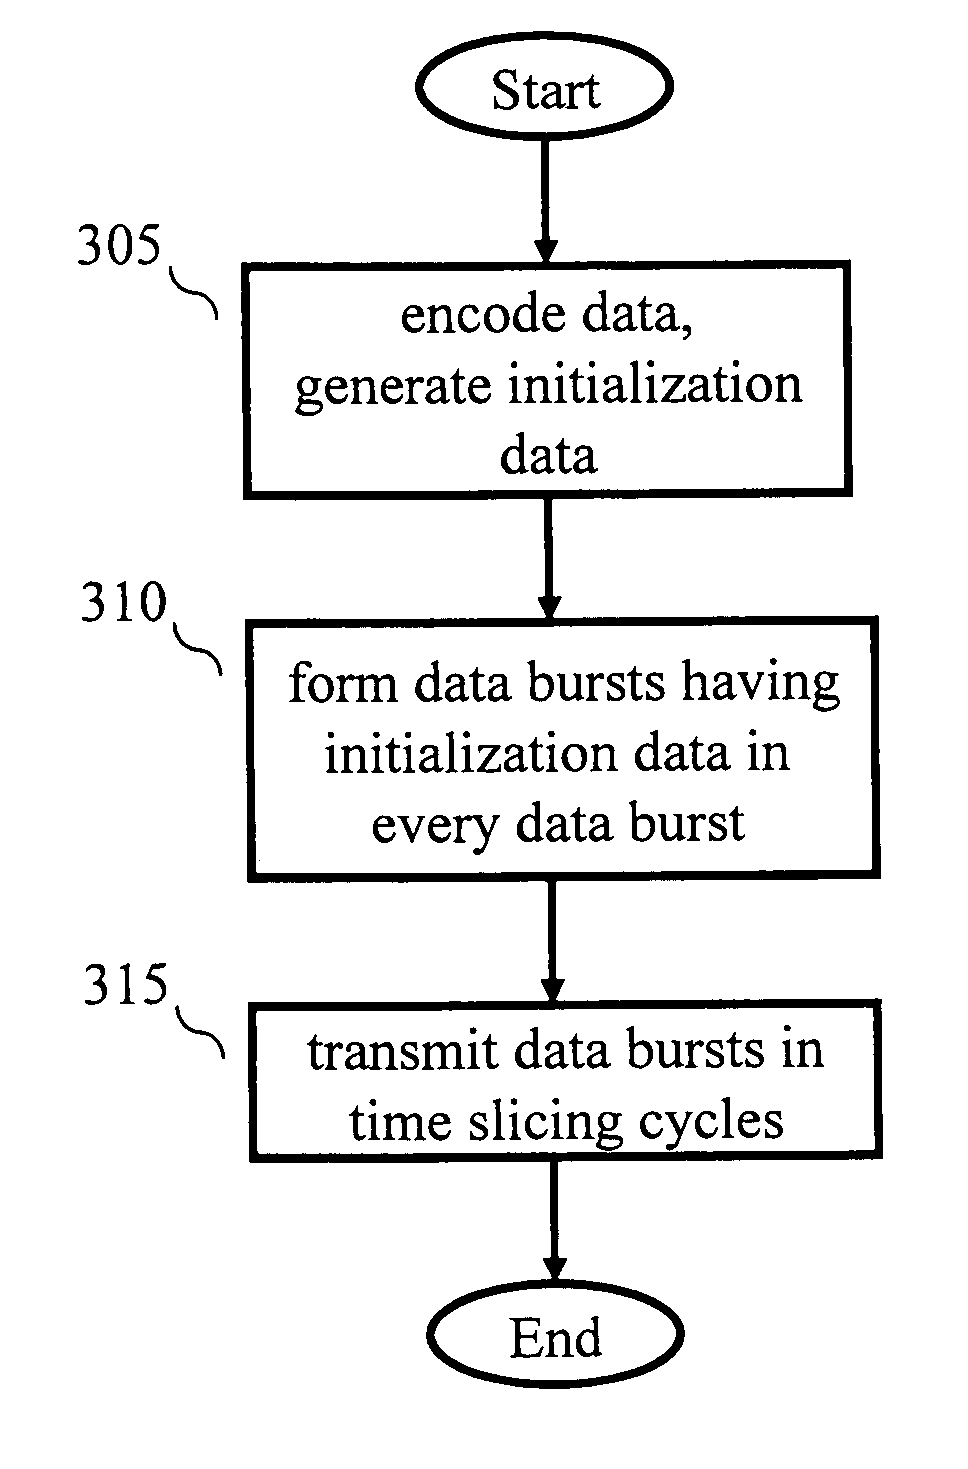 Synchronizing initialization data to time bursts in a mobile communications system